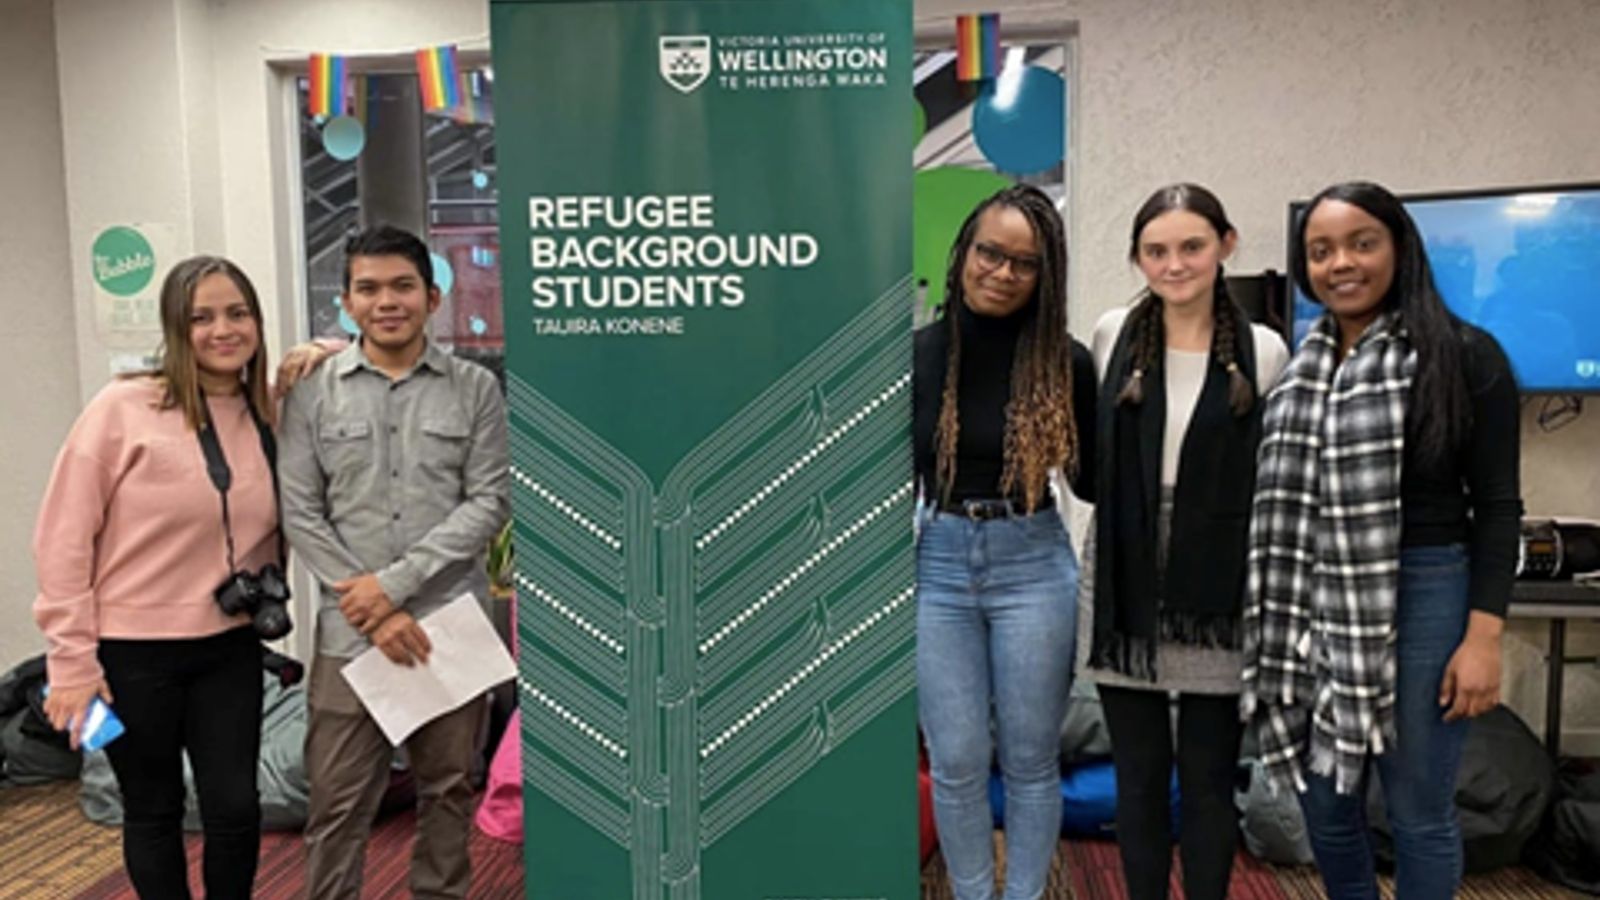 students with refugee background students sign